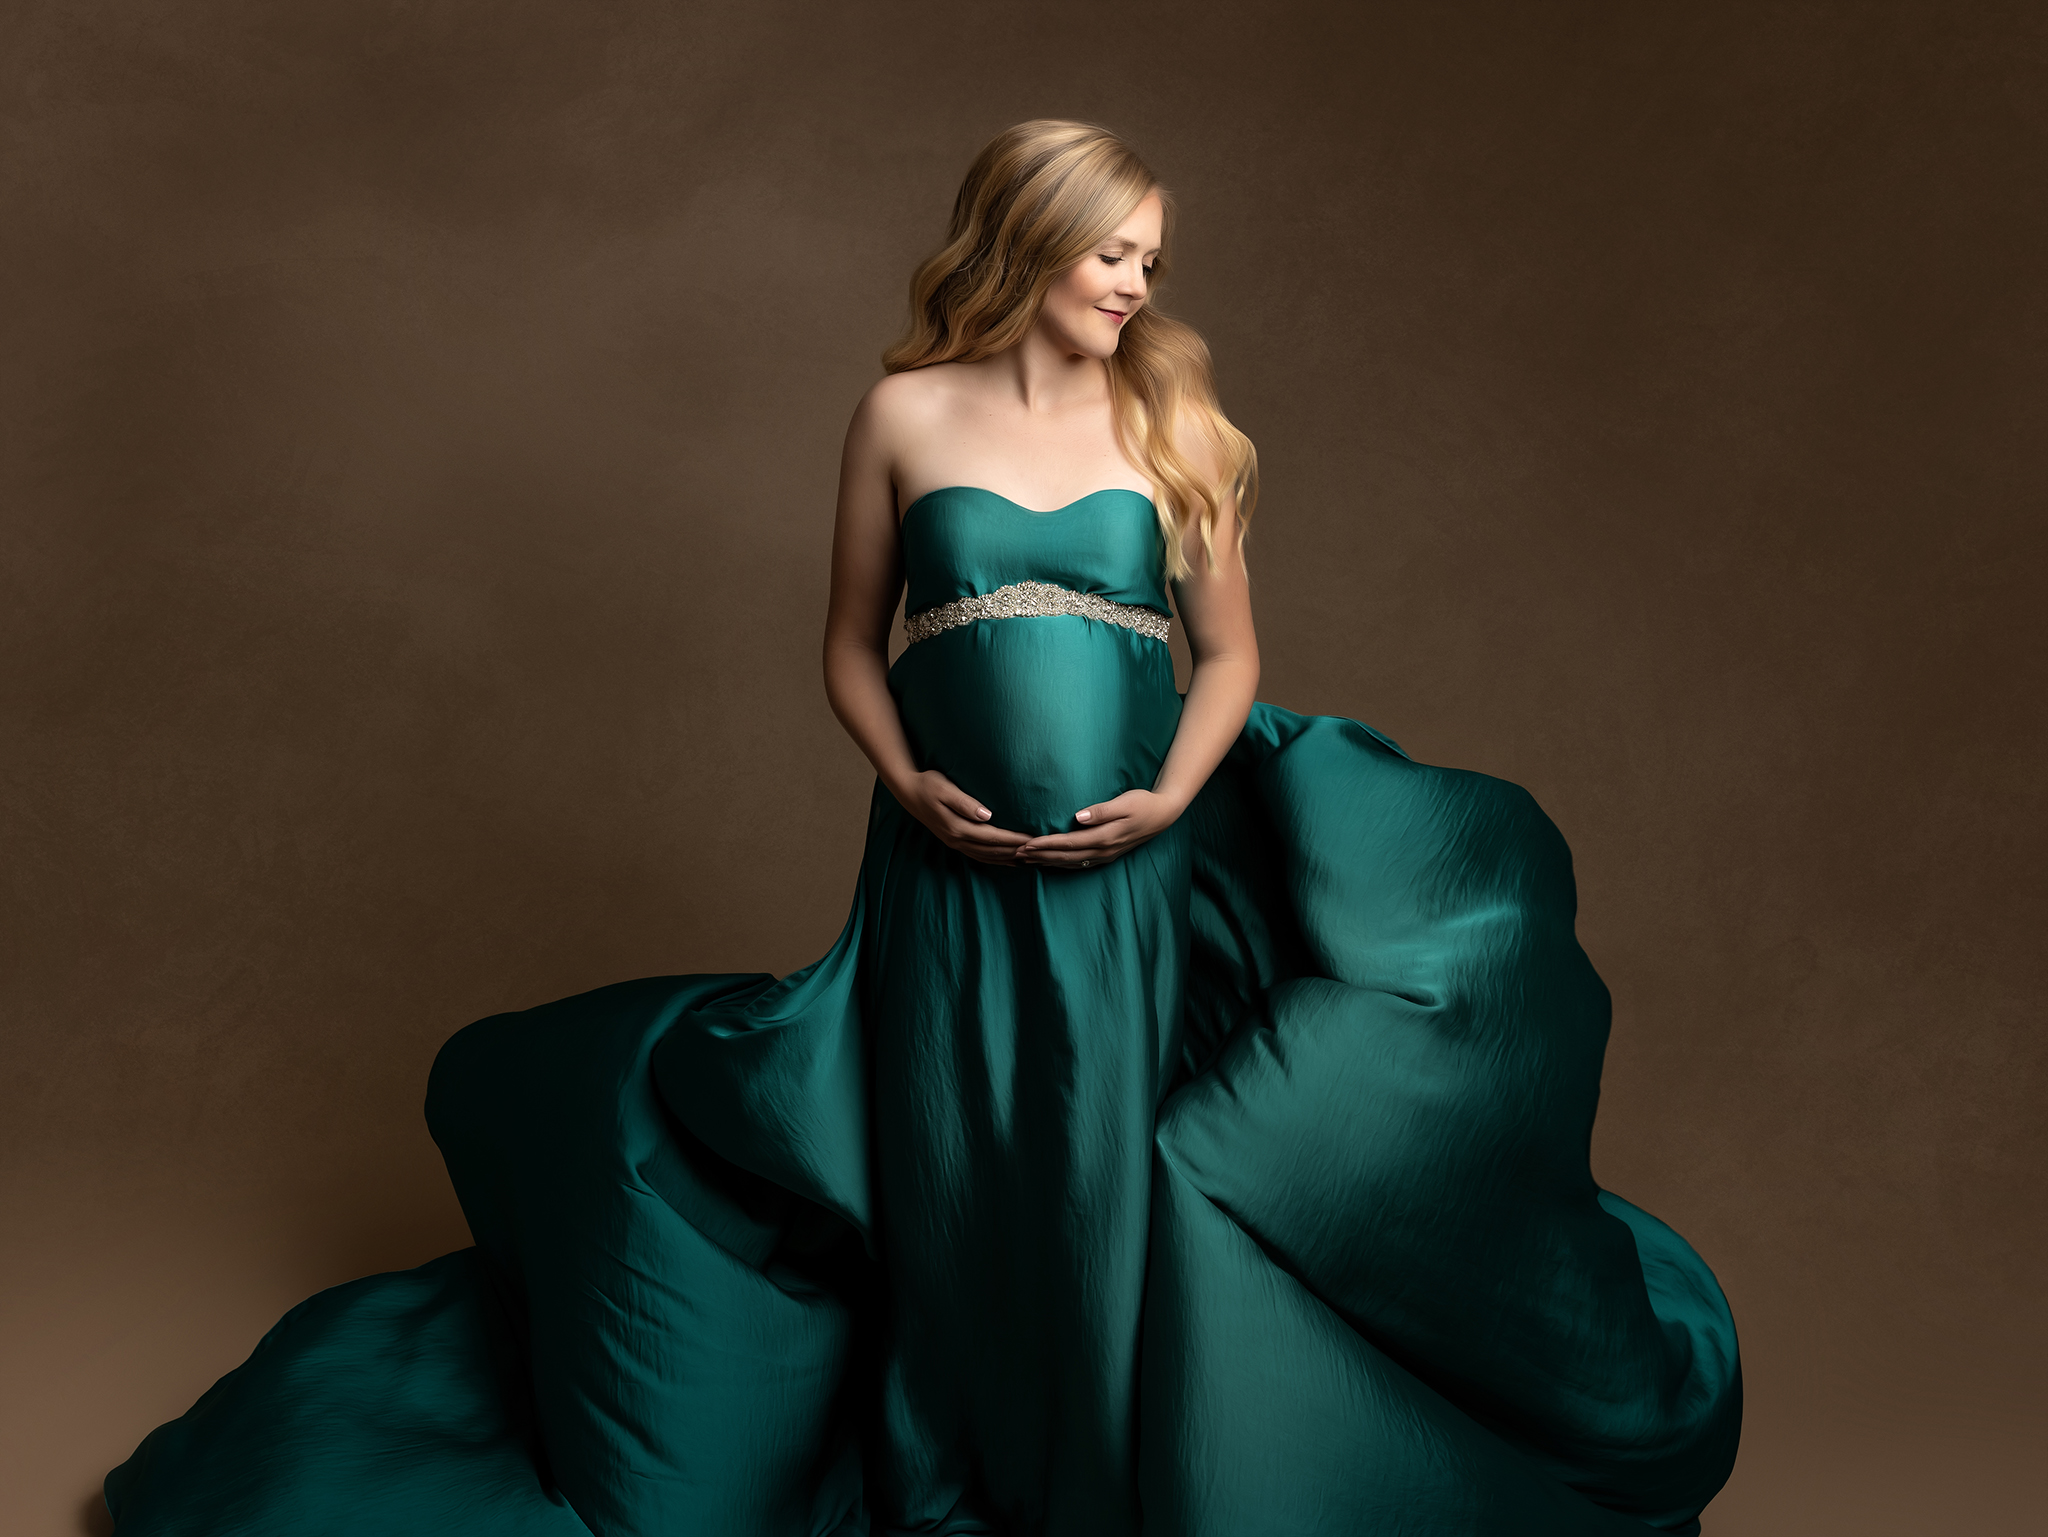 Pregnant woman stands in studio with a flowing blue maternity gown.